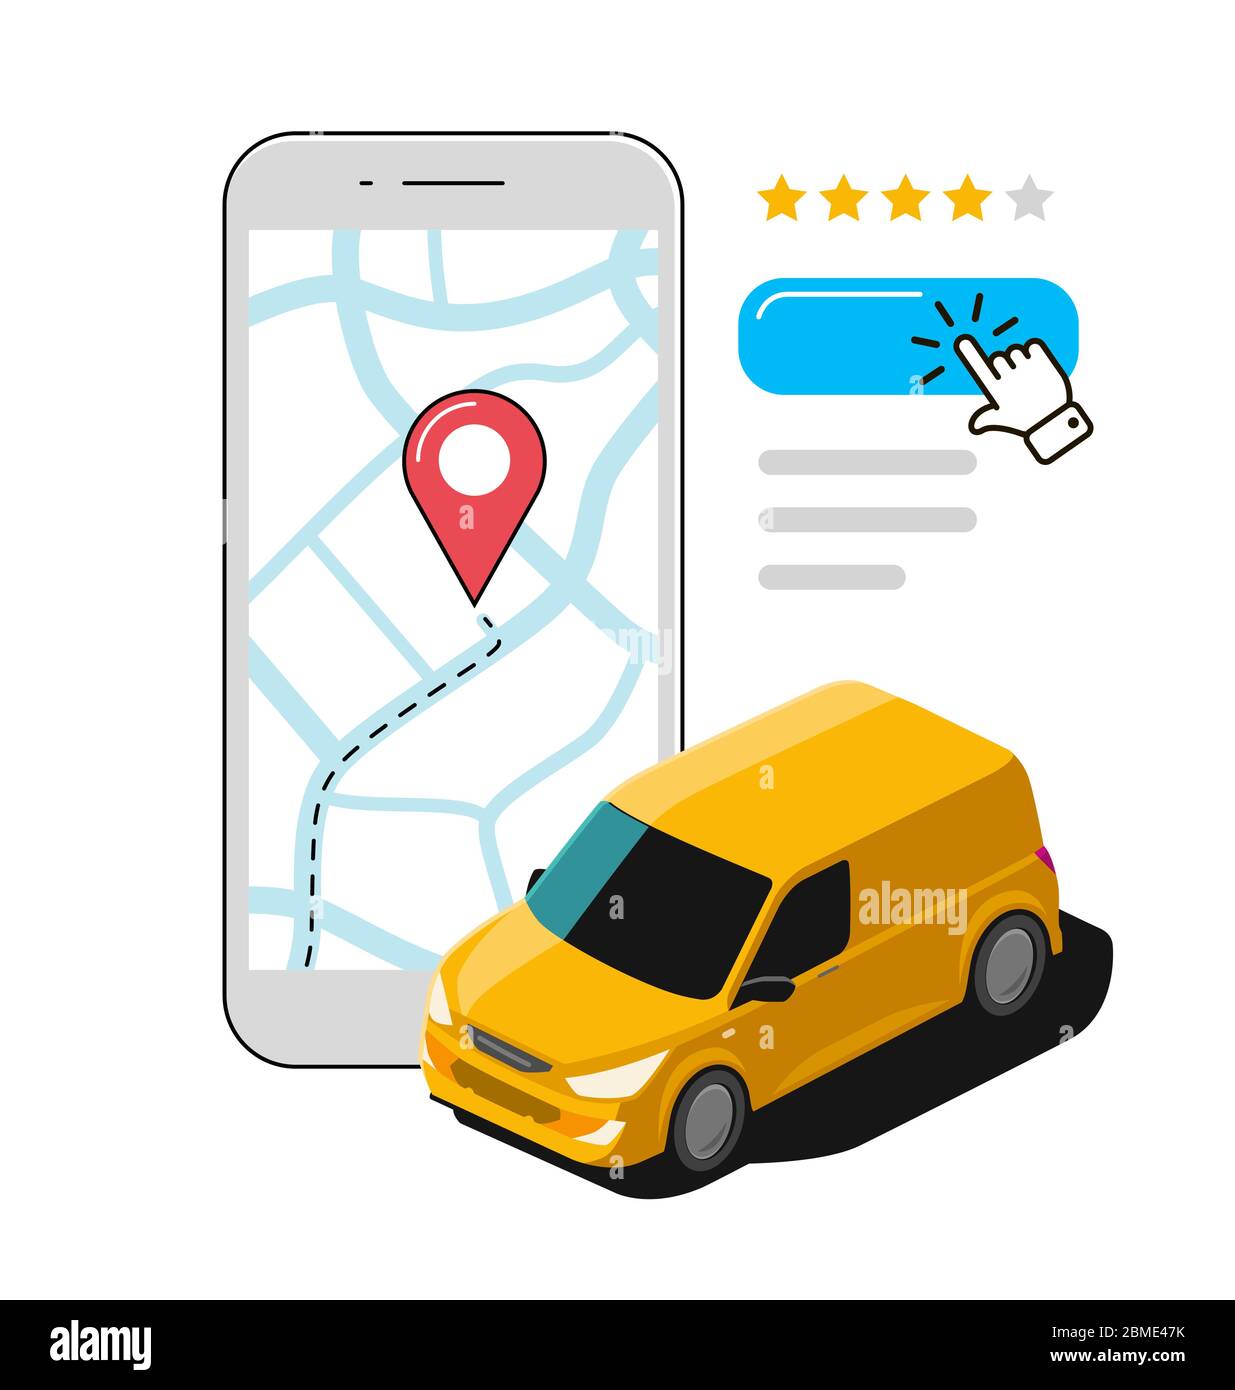 Express delivery using mobile app. Transport vector illustration Stock Vector